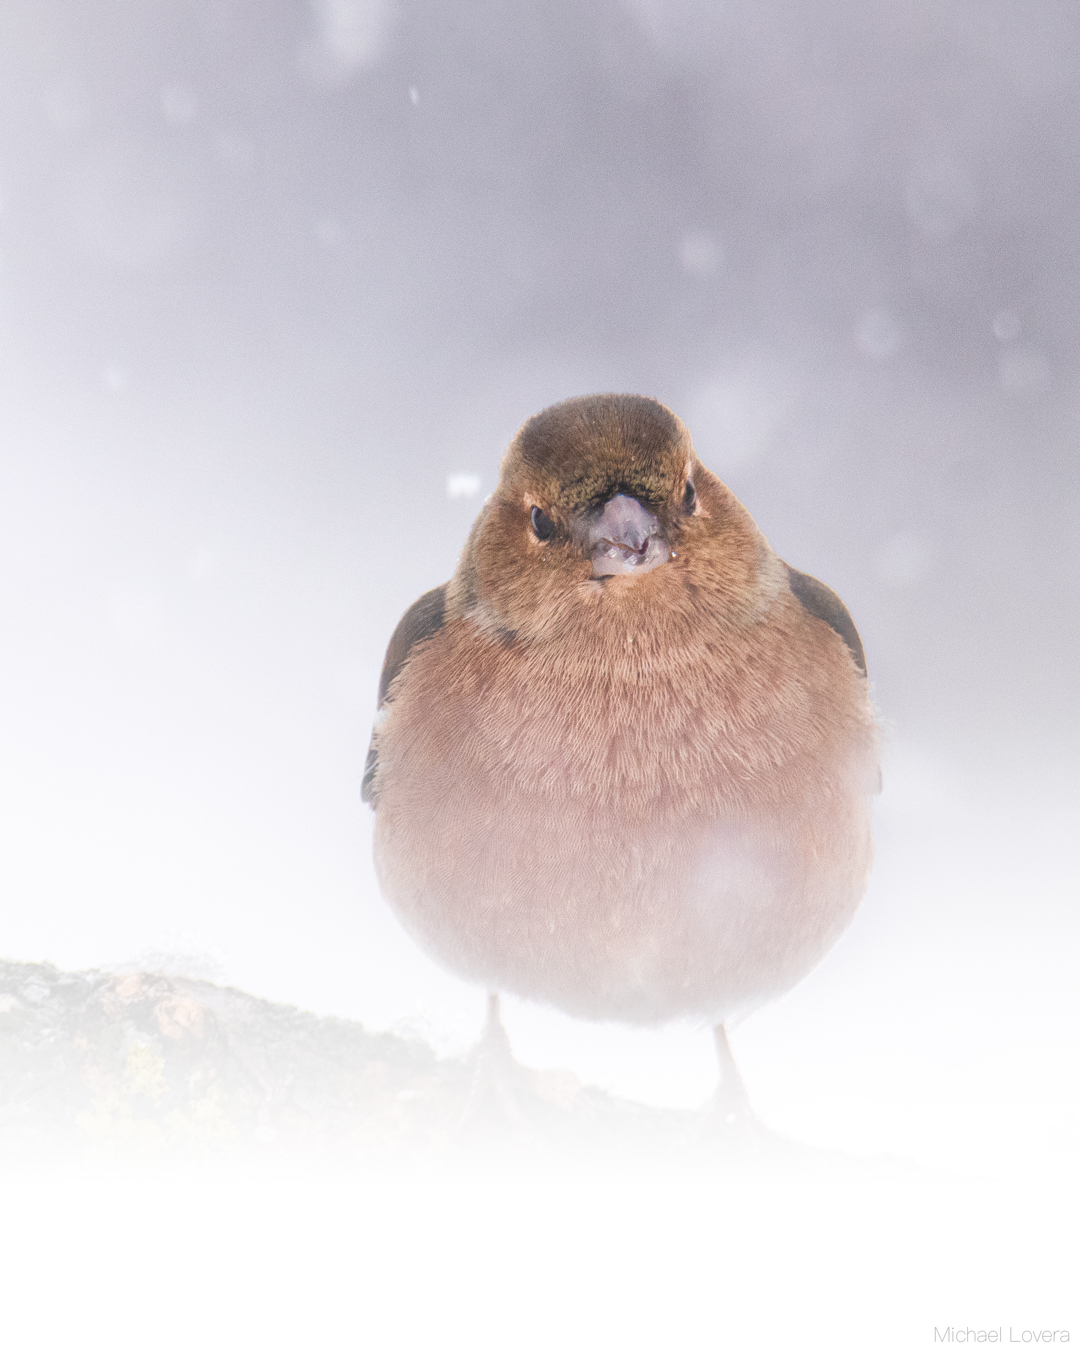 The chaffinch and the storm...